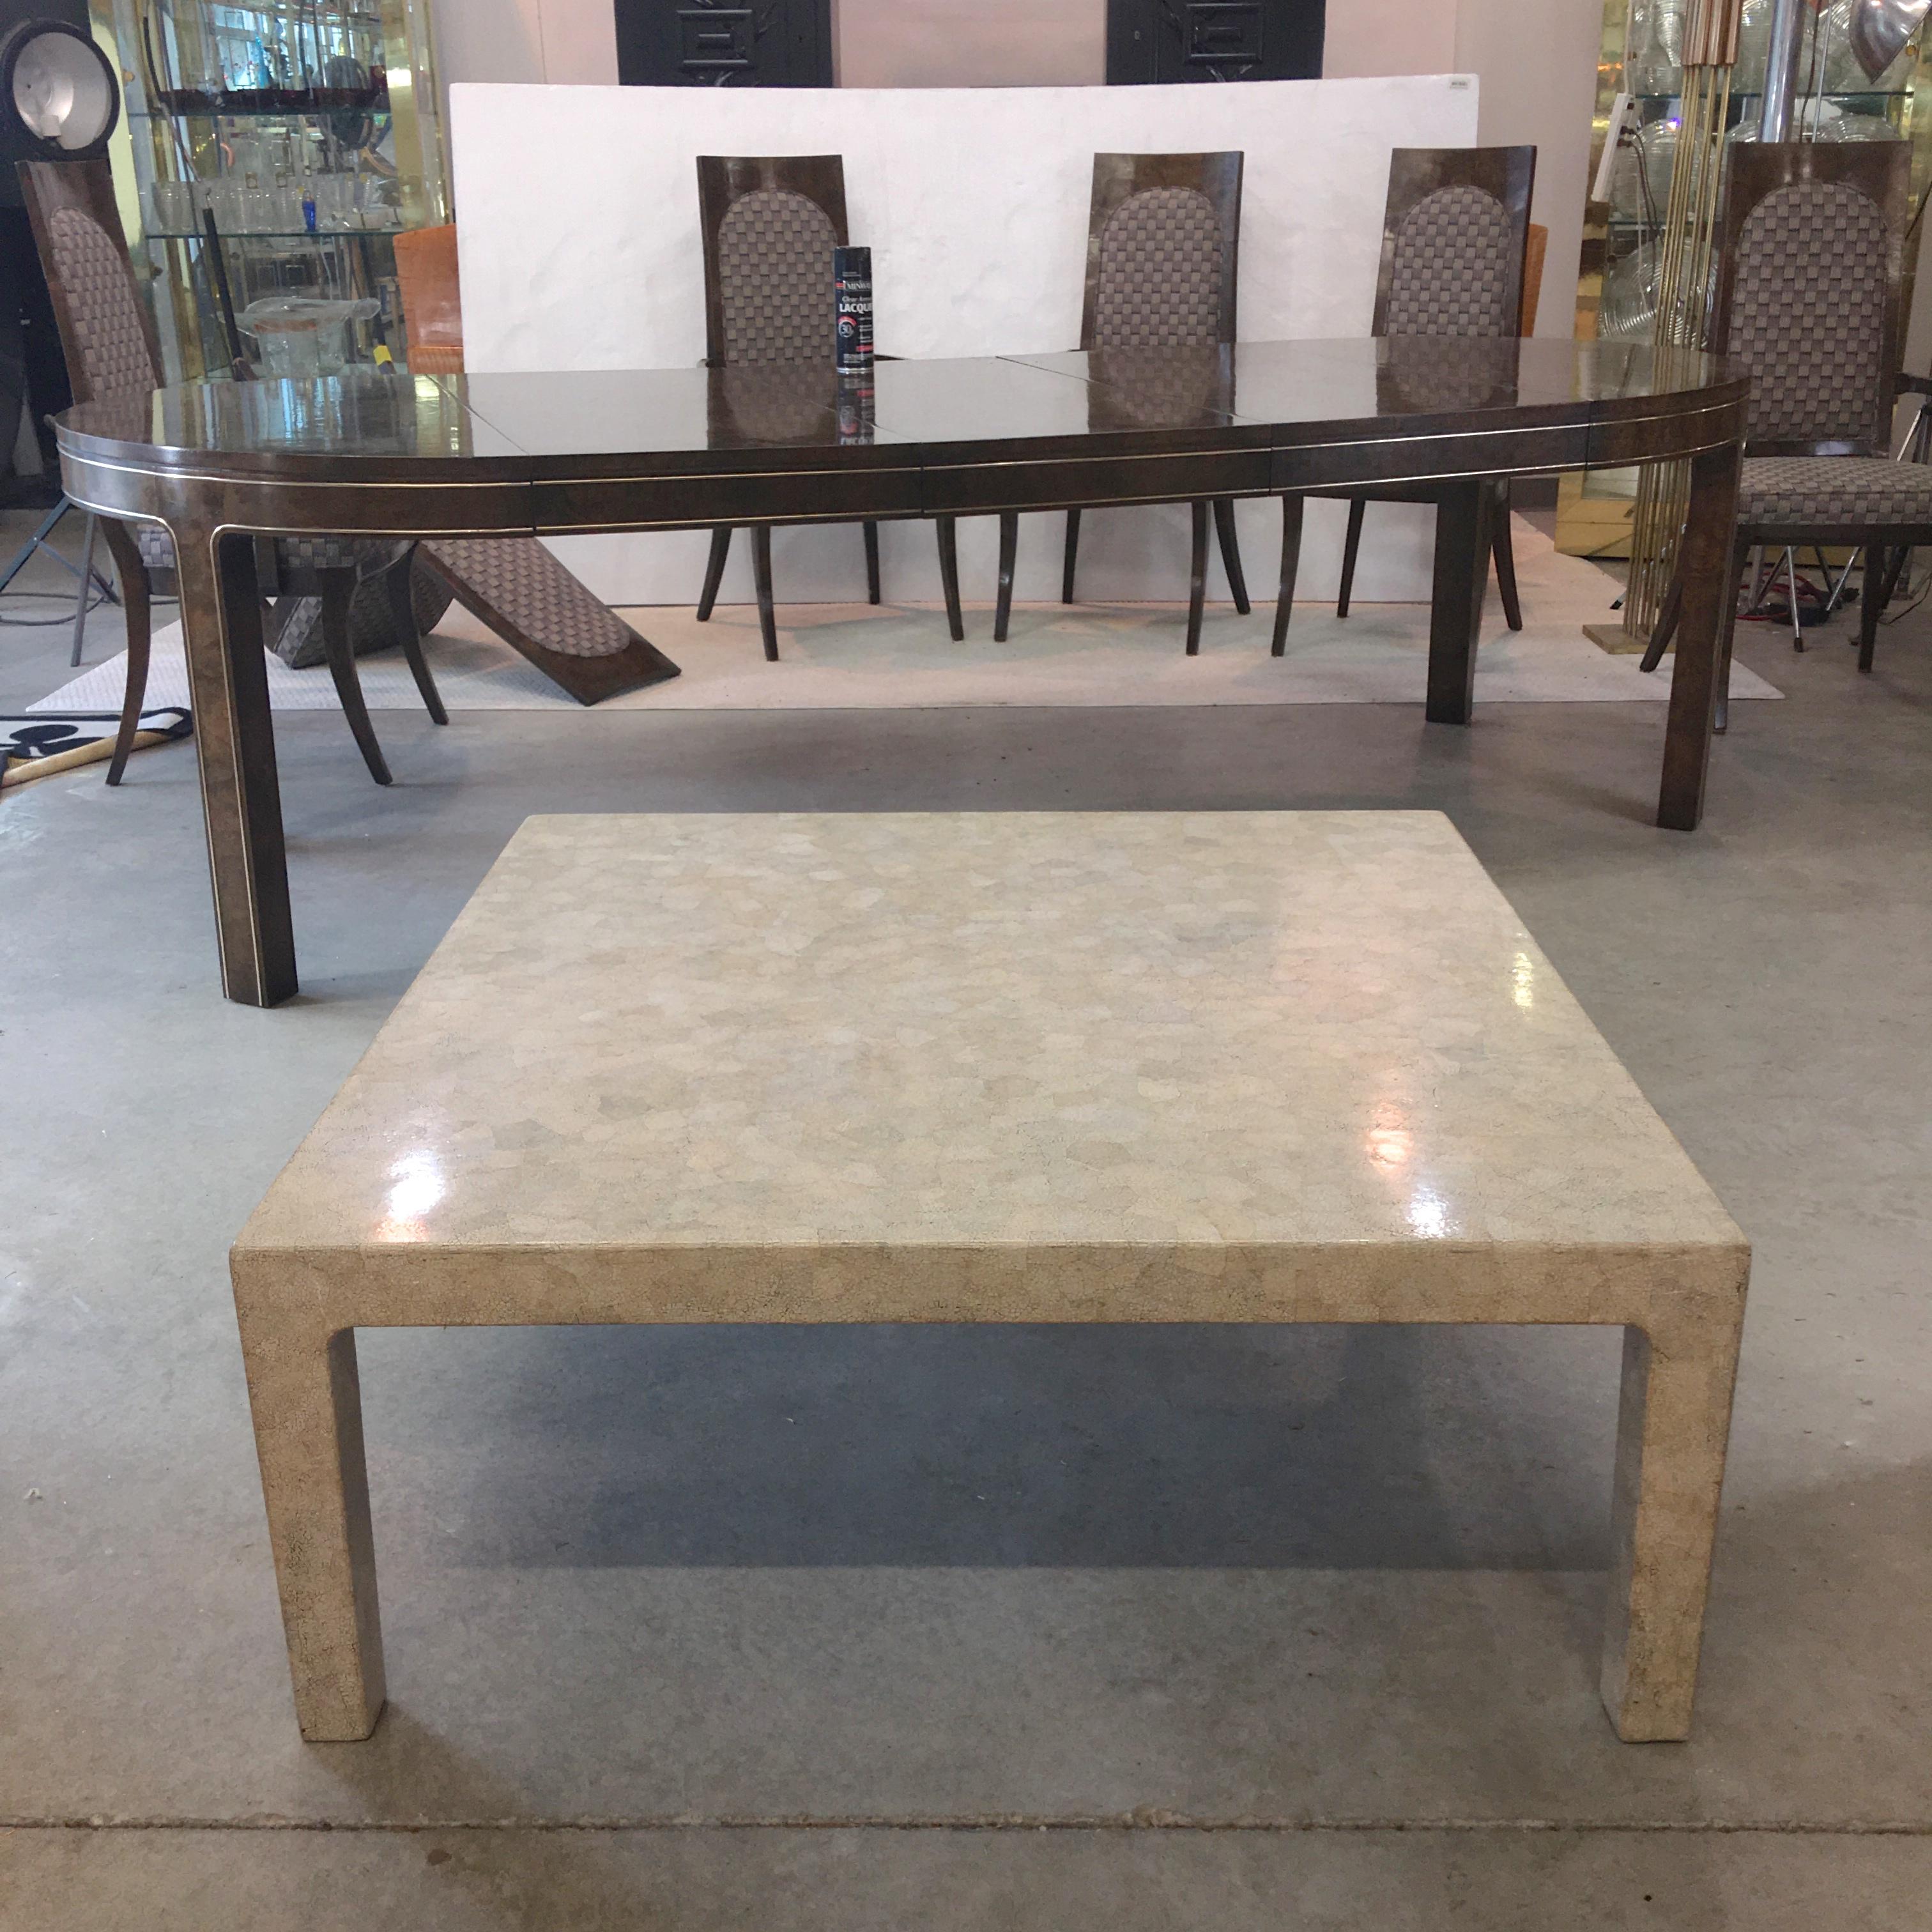 Square low table designed by Christian Duc and produced by the company he co-founded 